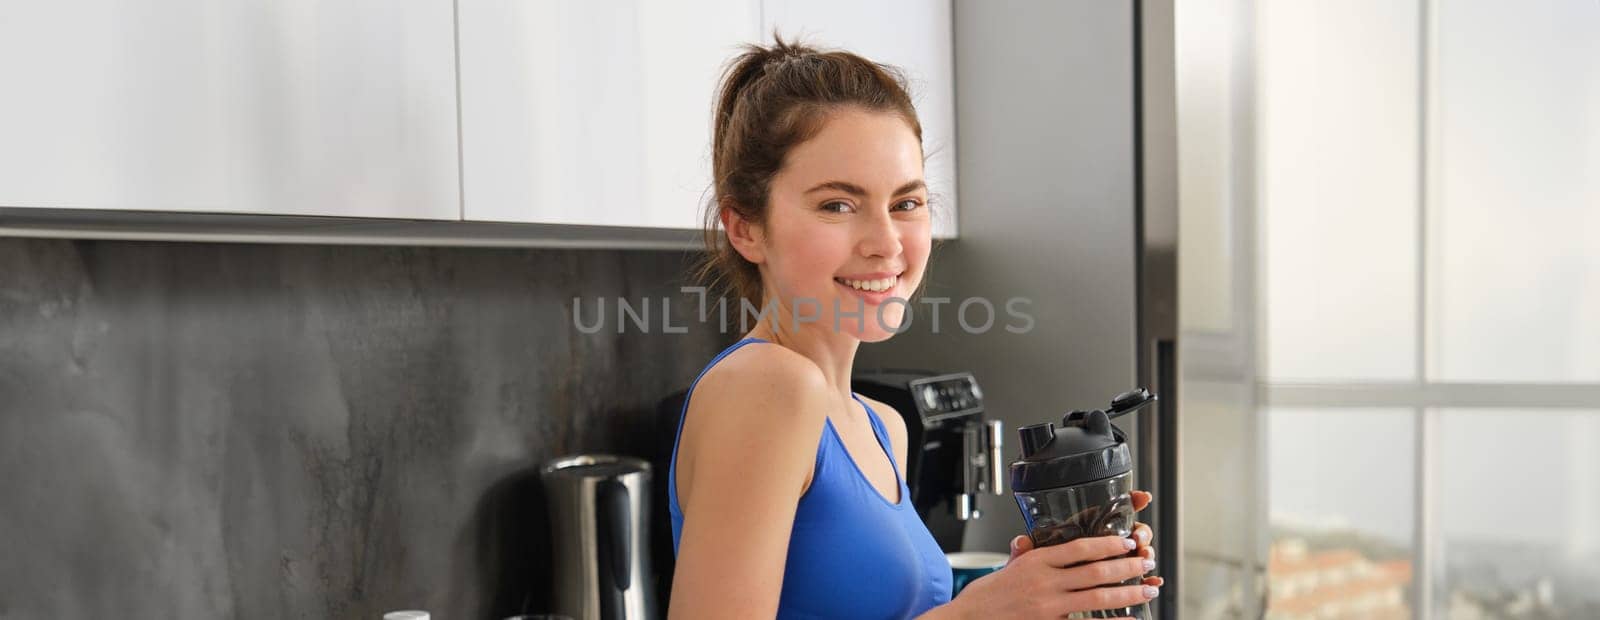 Image of young fitness instructor, woman in sportsbra and leggings, holding water bottle, drinking after workout, standing in kitchen.